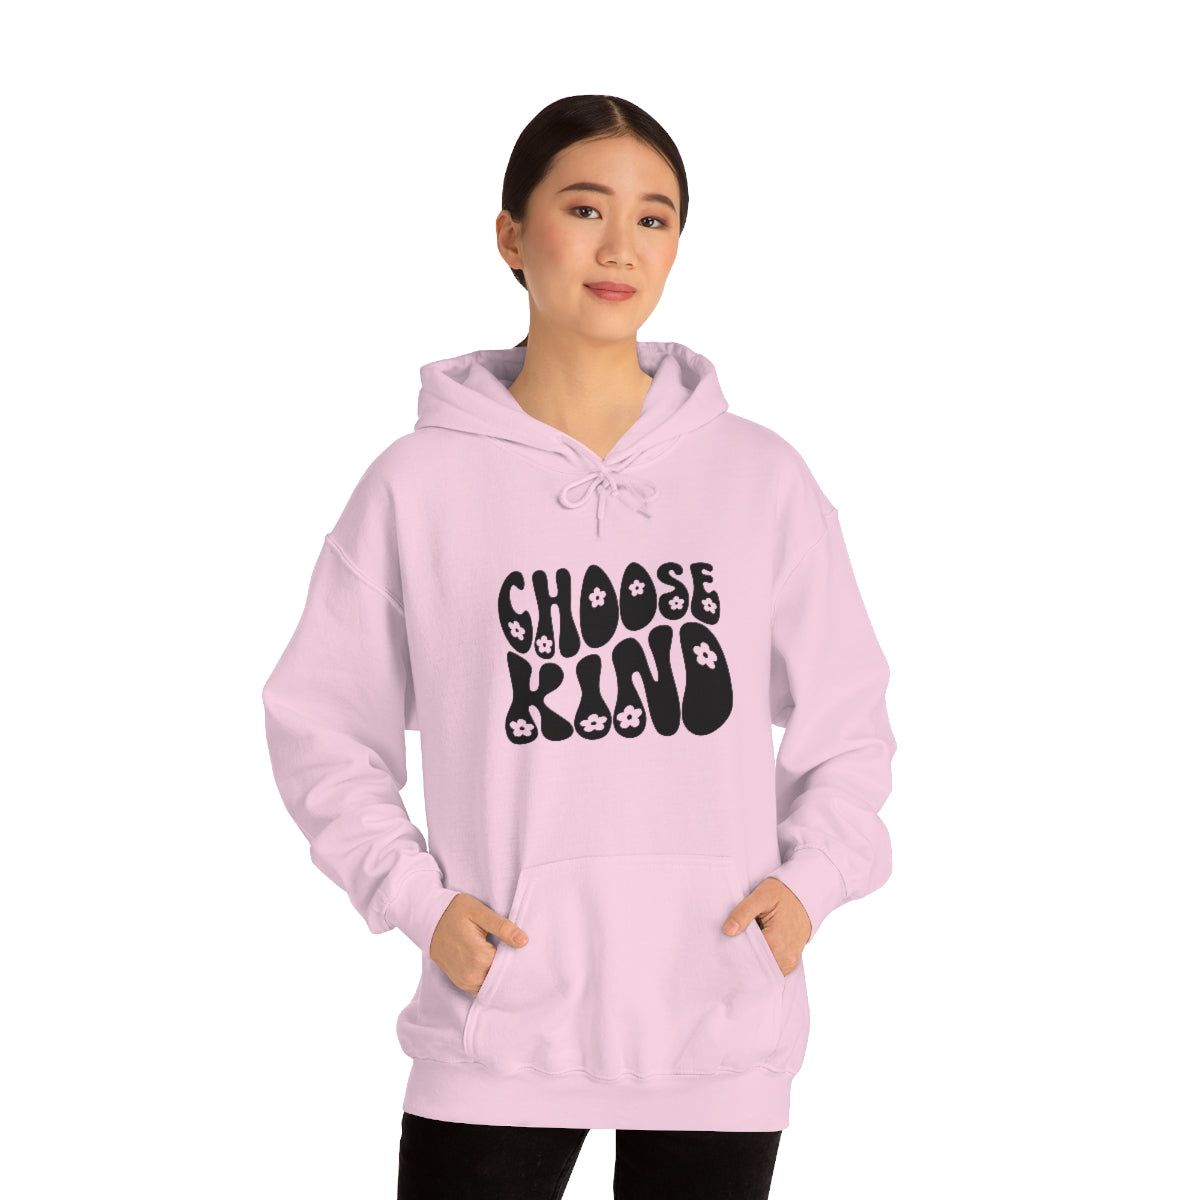 Choose Kindness Every Day with Our "Choose Kind" Sweatshirt